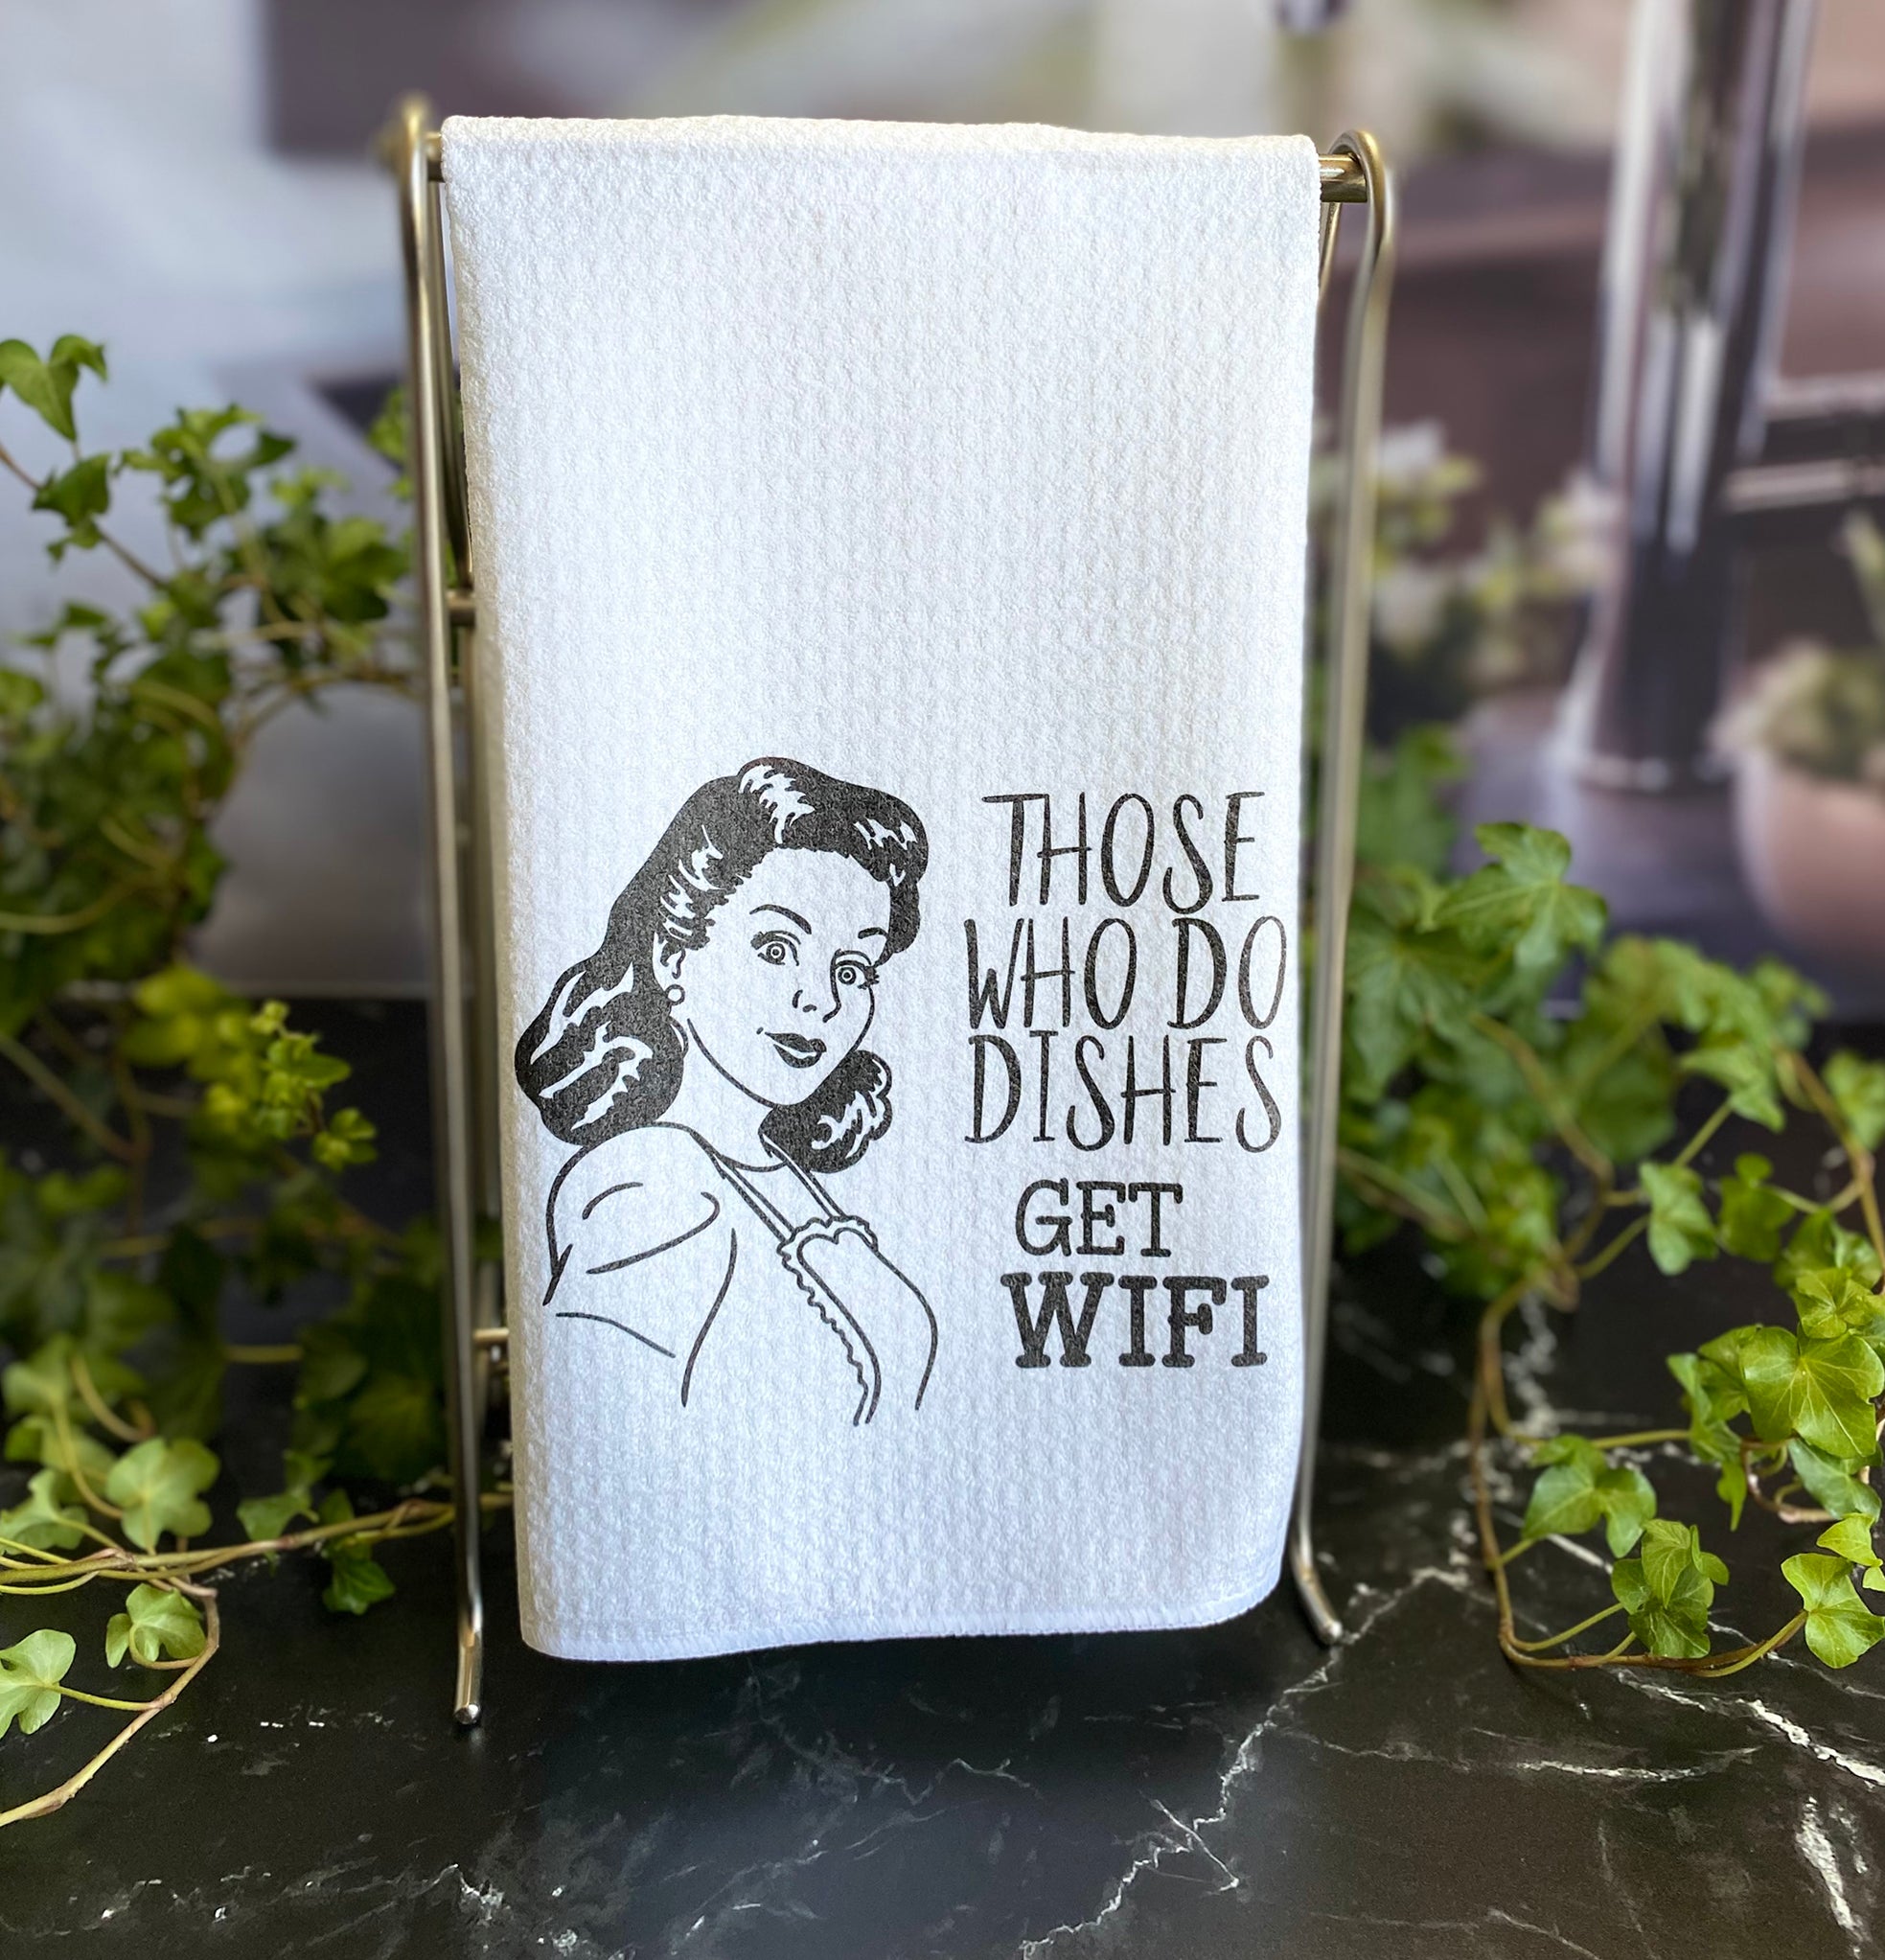 Dishtowel with a a black and white image of a hand drawn woman from the 1950's, with the words, "Those who do dishes get WIFI"